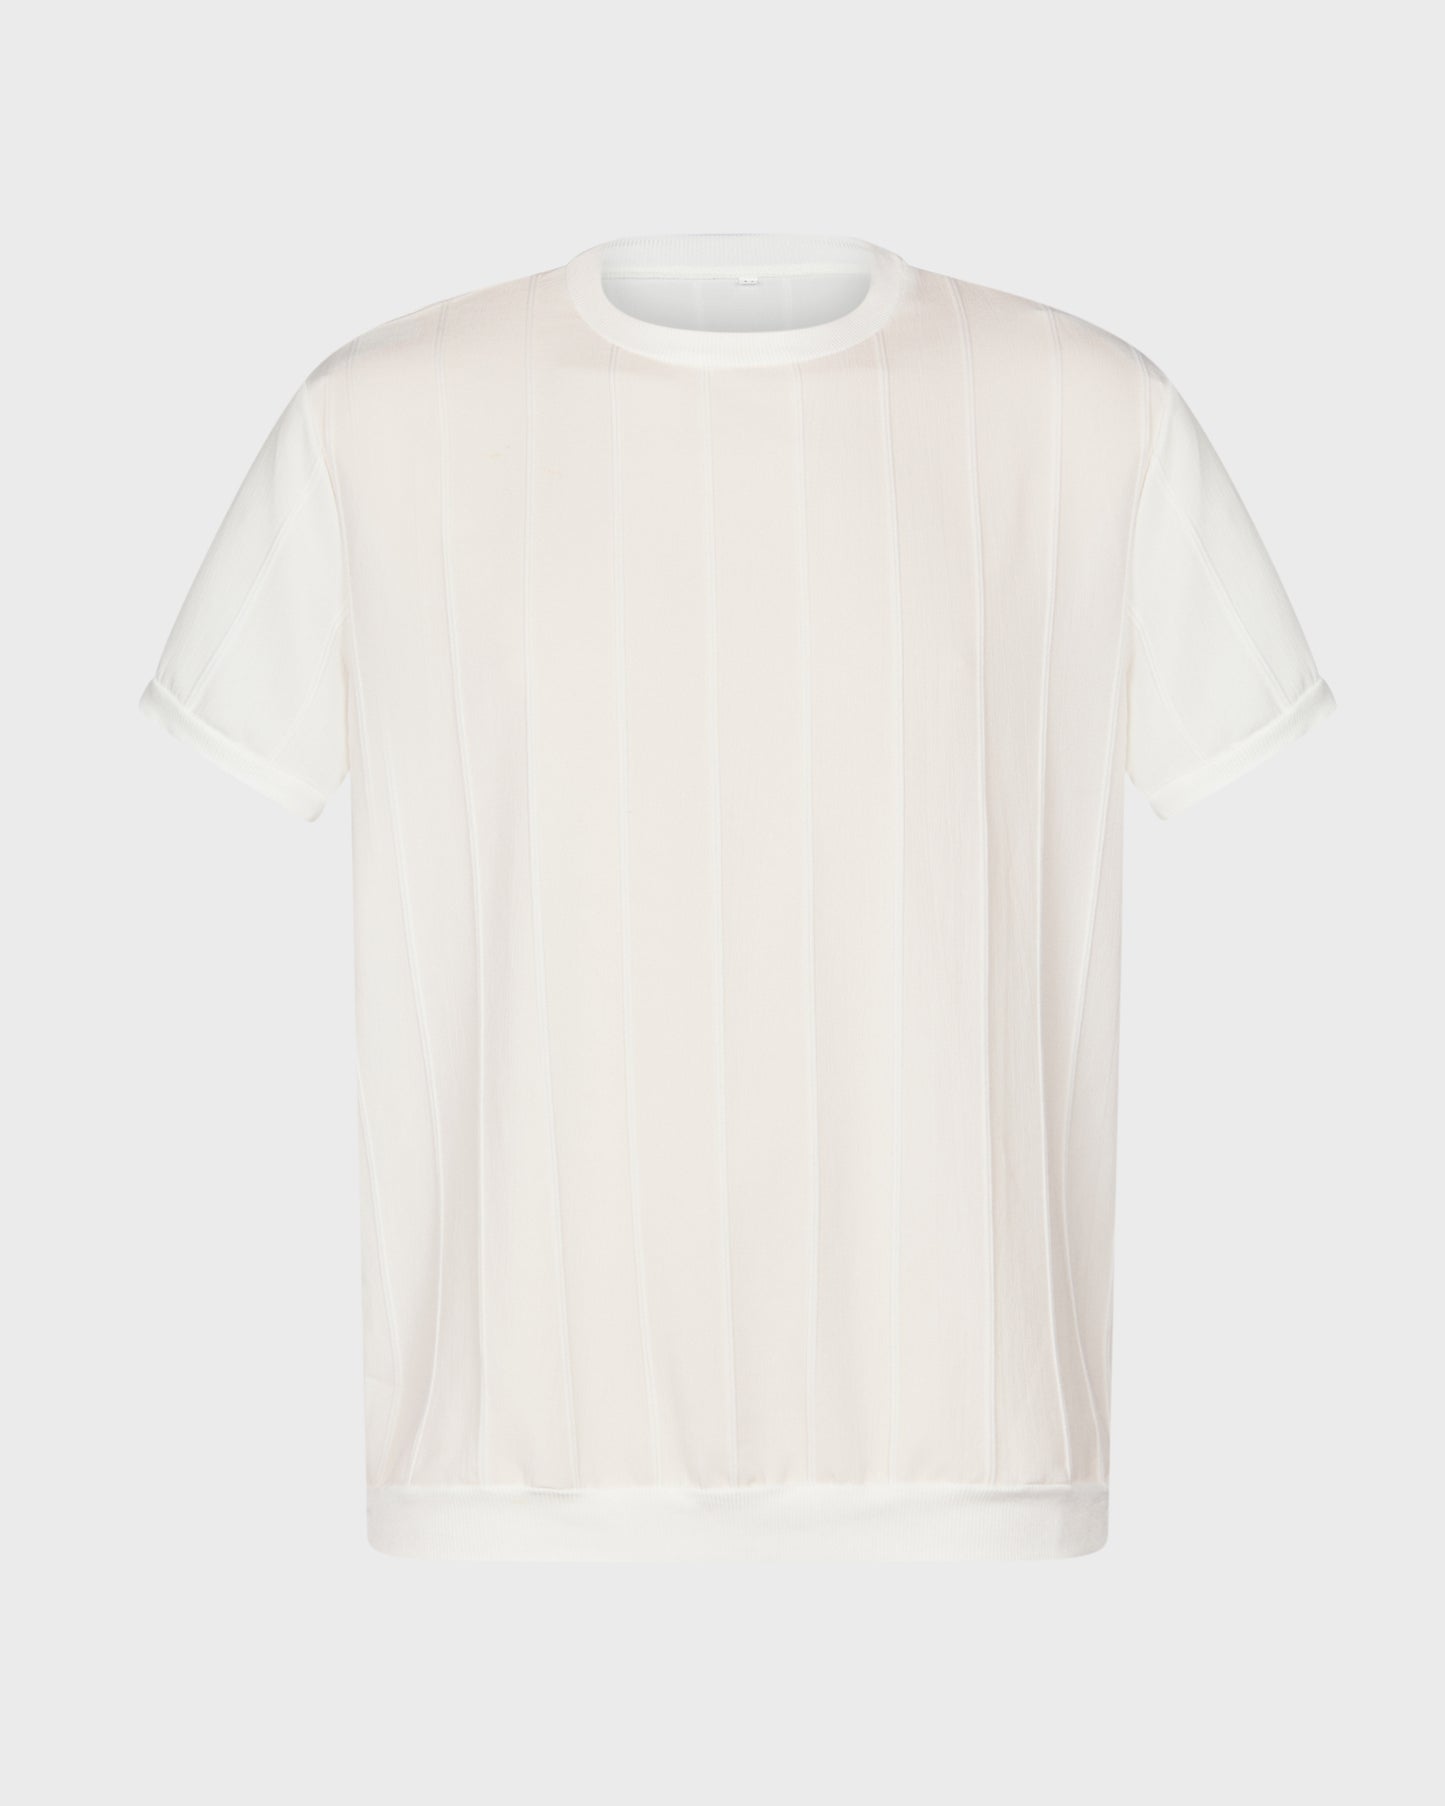 Unbranded Crew T-Shirt with Striped Detail